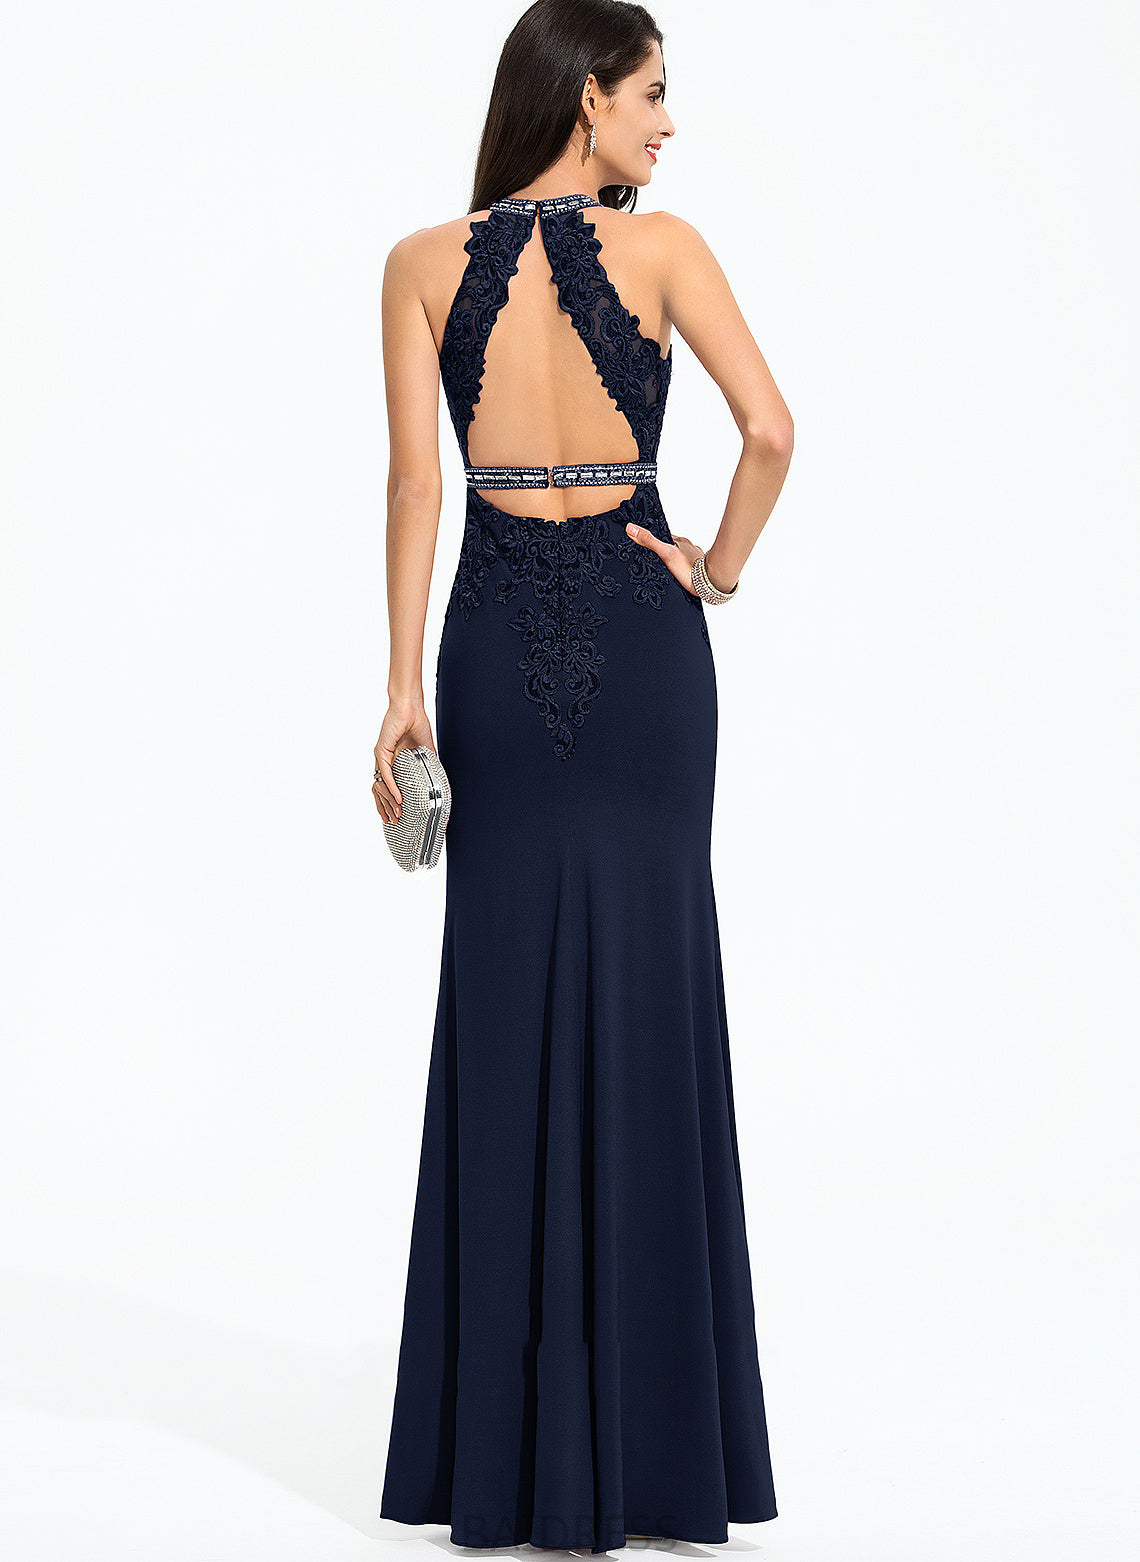 Sheath/Column Floor-Length Prom Dresses Beading Sequins Chaya Neck Scoop Jersey With